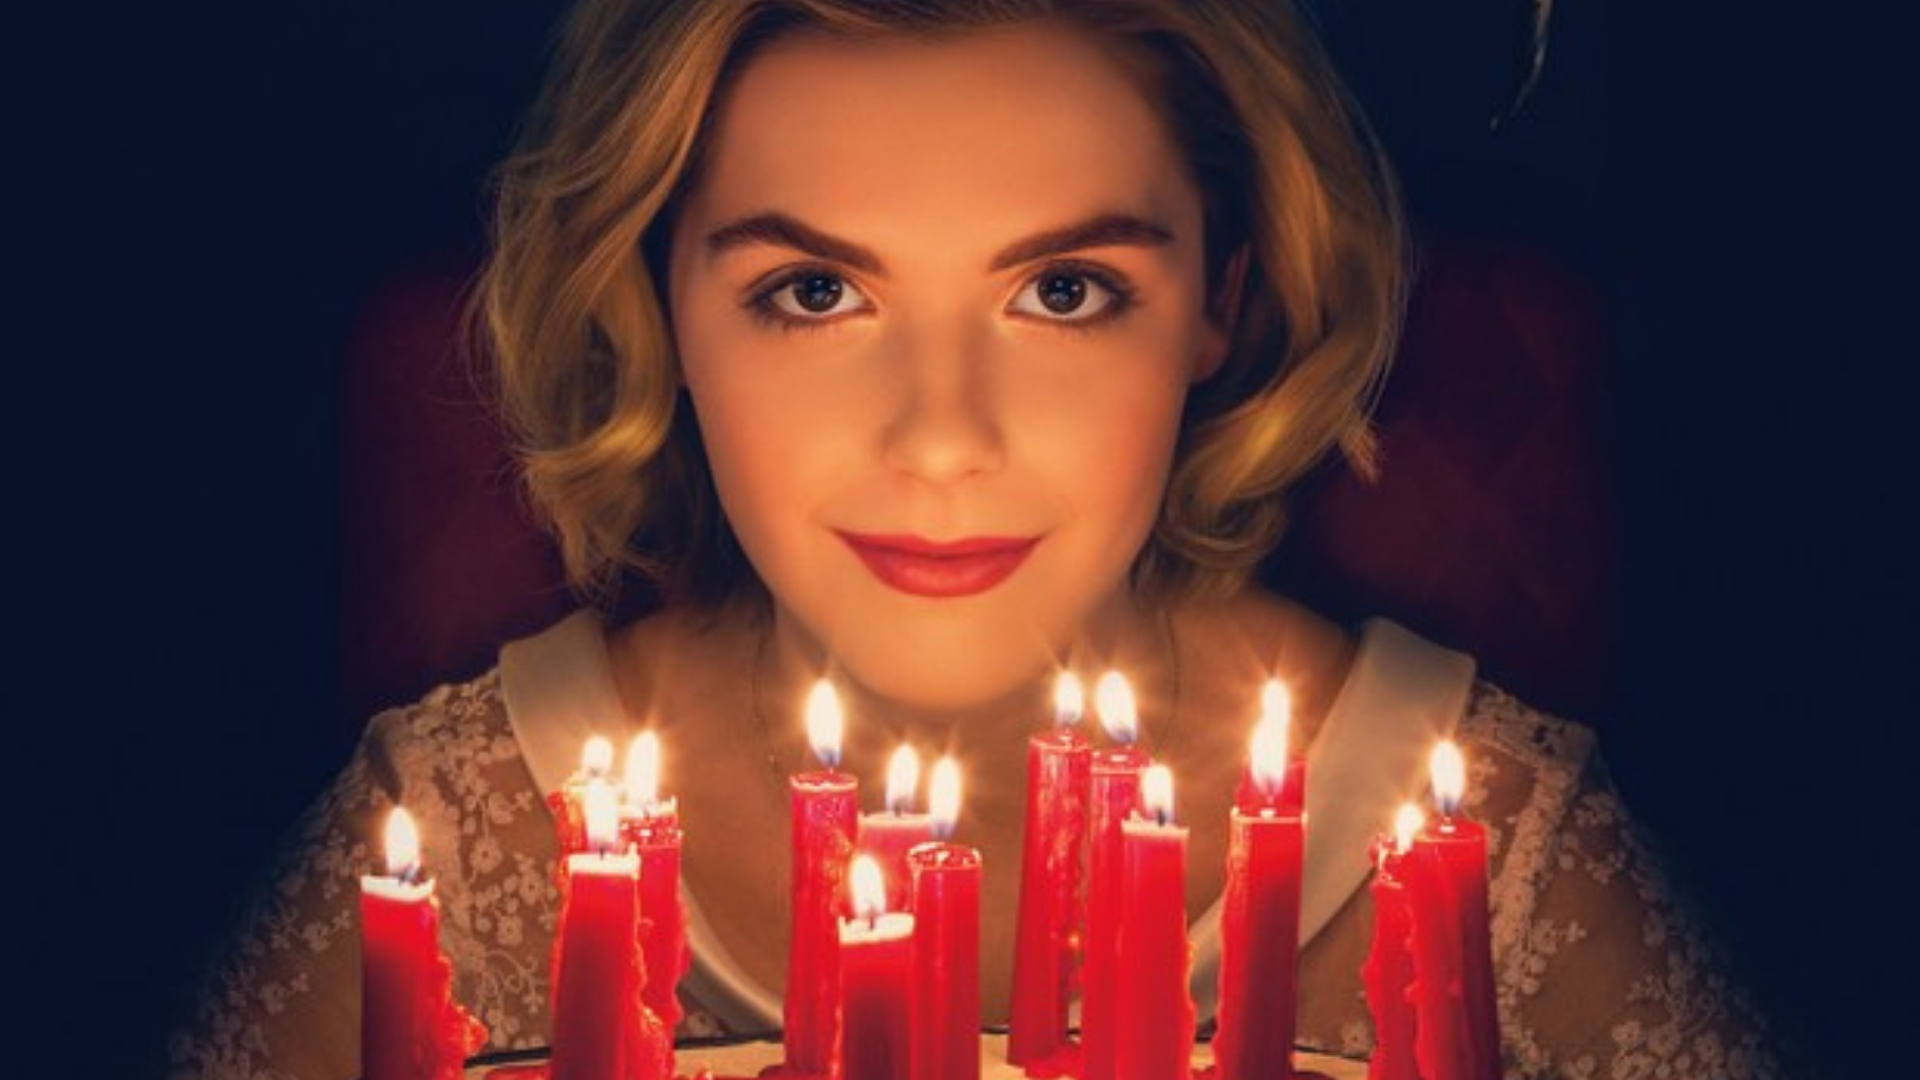 The Chilling Adventures of sabrina